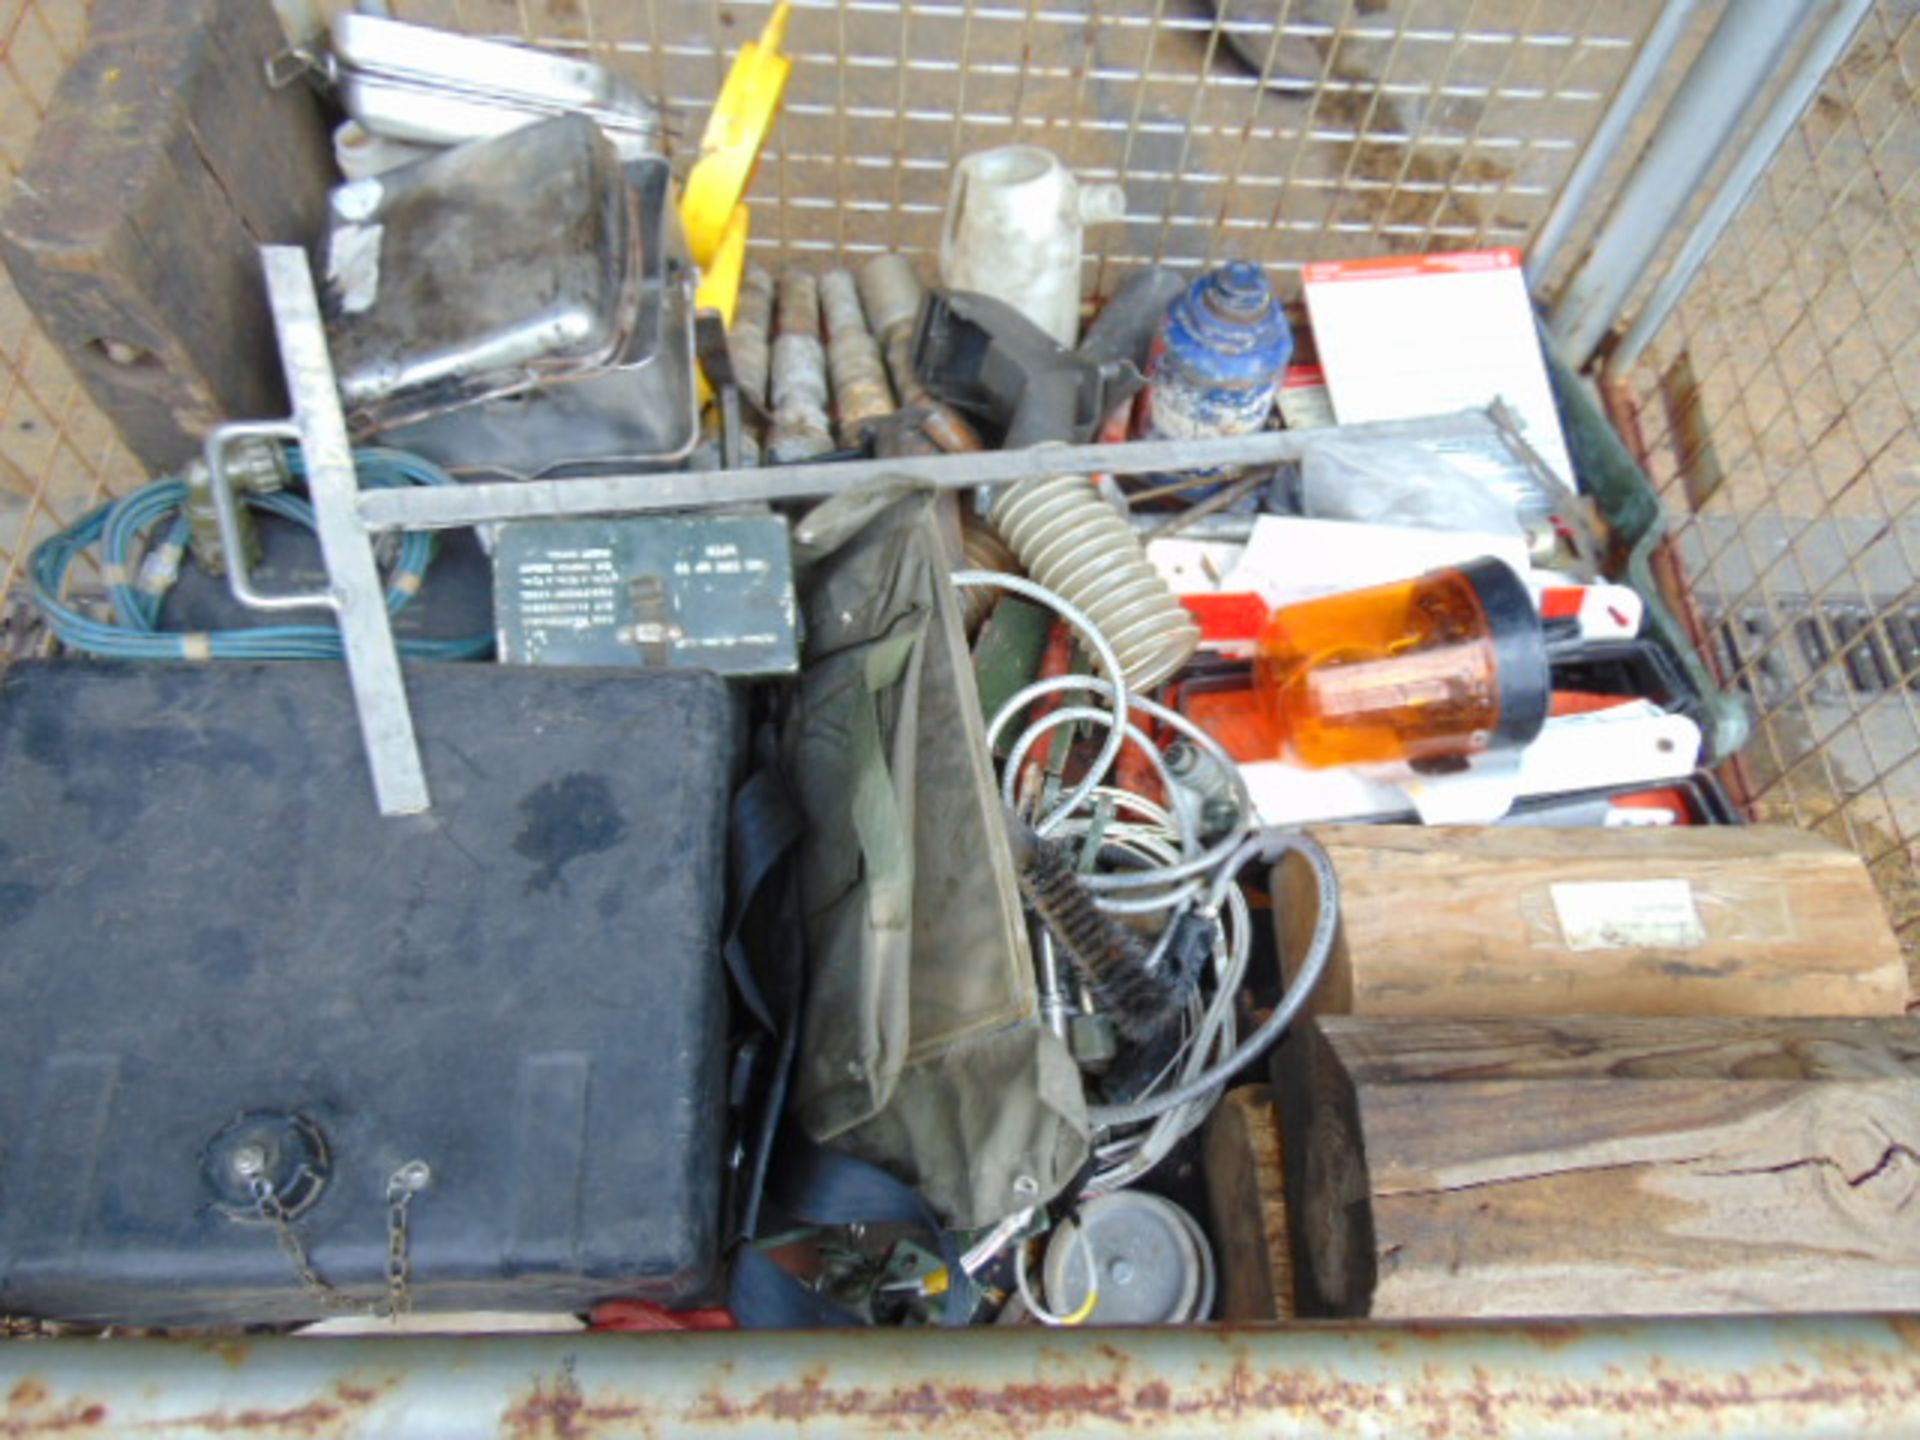 1 x Stillage of Fighting Vehicle Spares inc Cables, Pins, Water Container, Chocks, Beacon etc - Image 4 of 5